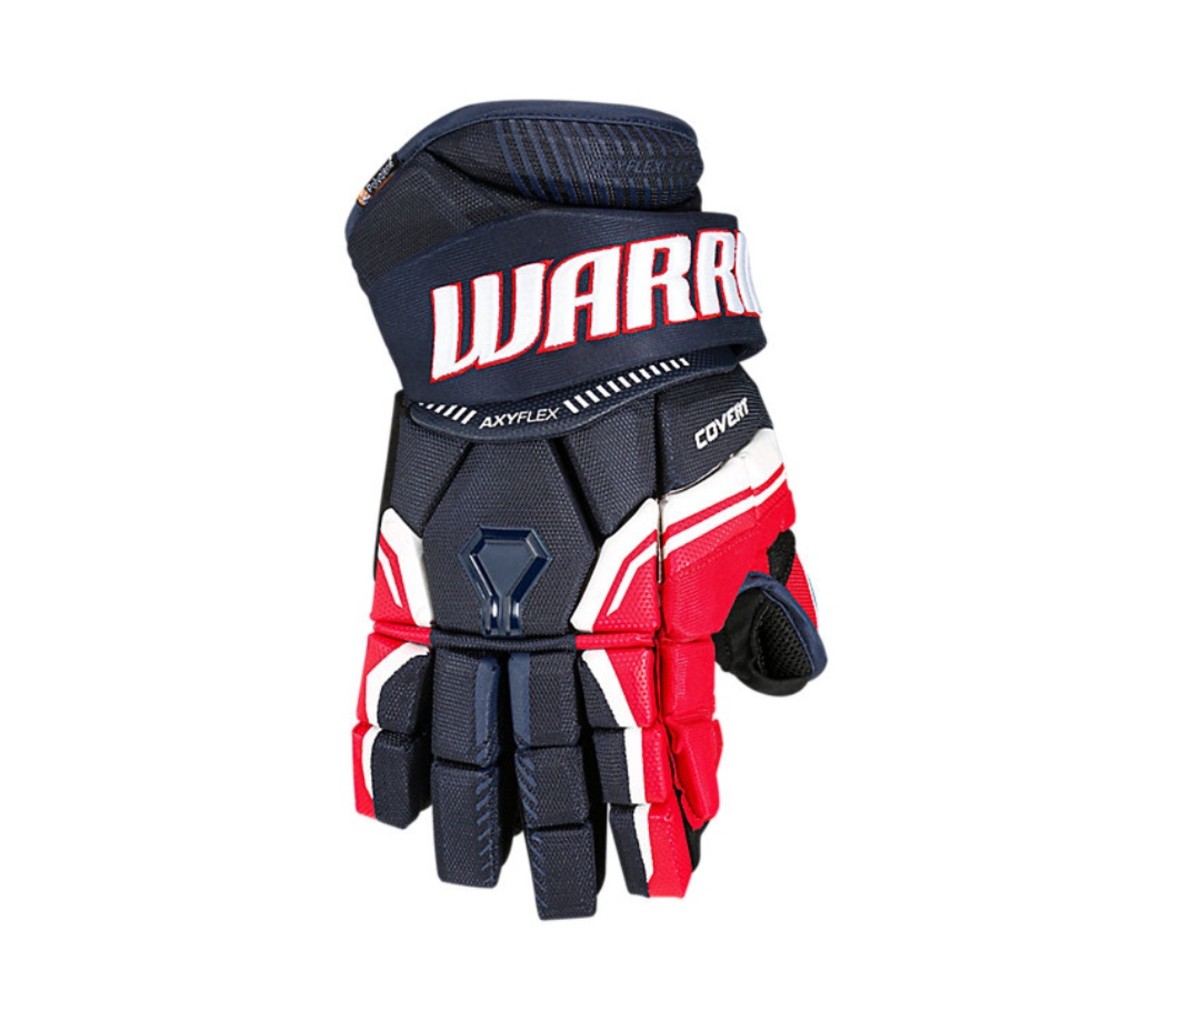 Sharpen up your hockey game with any of these new on-ice gear must-haves.